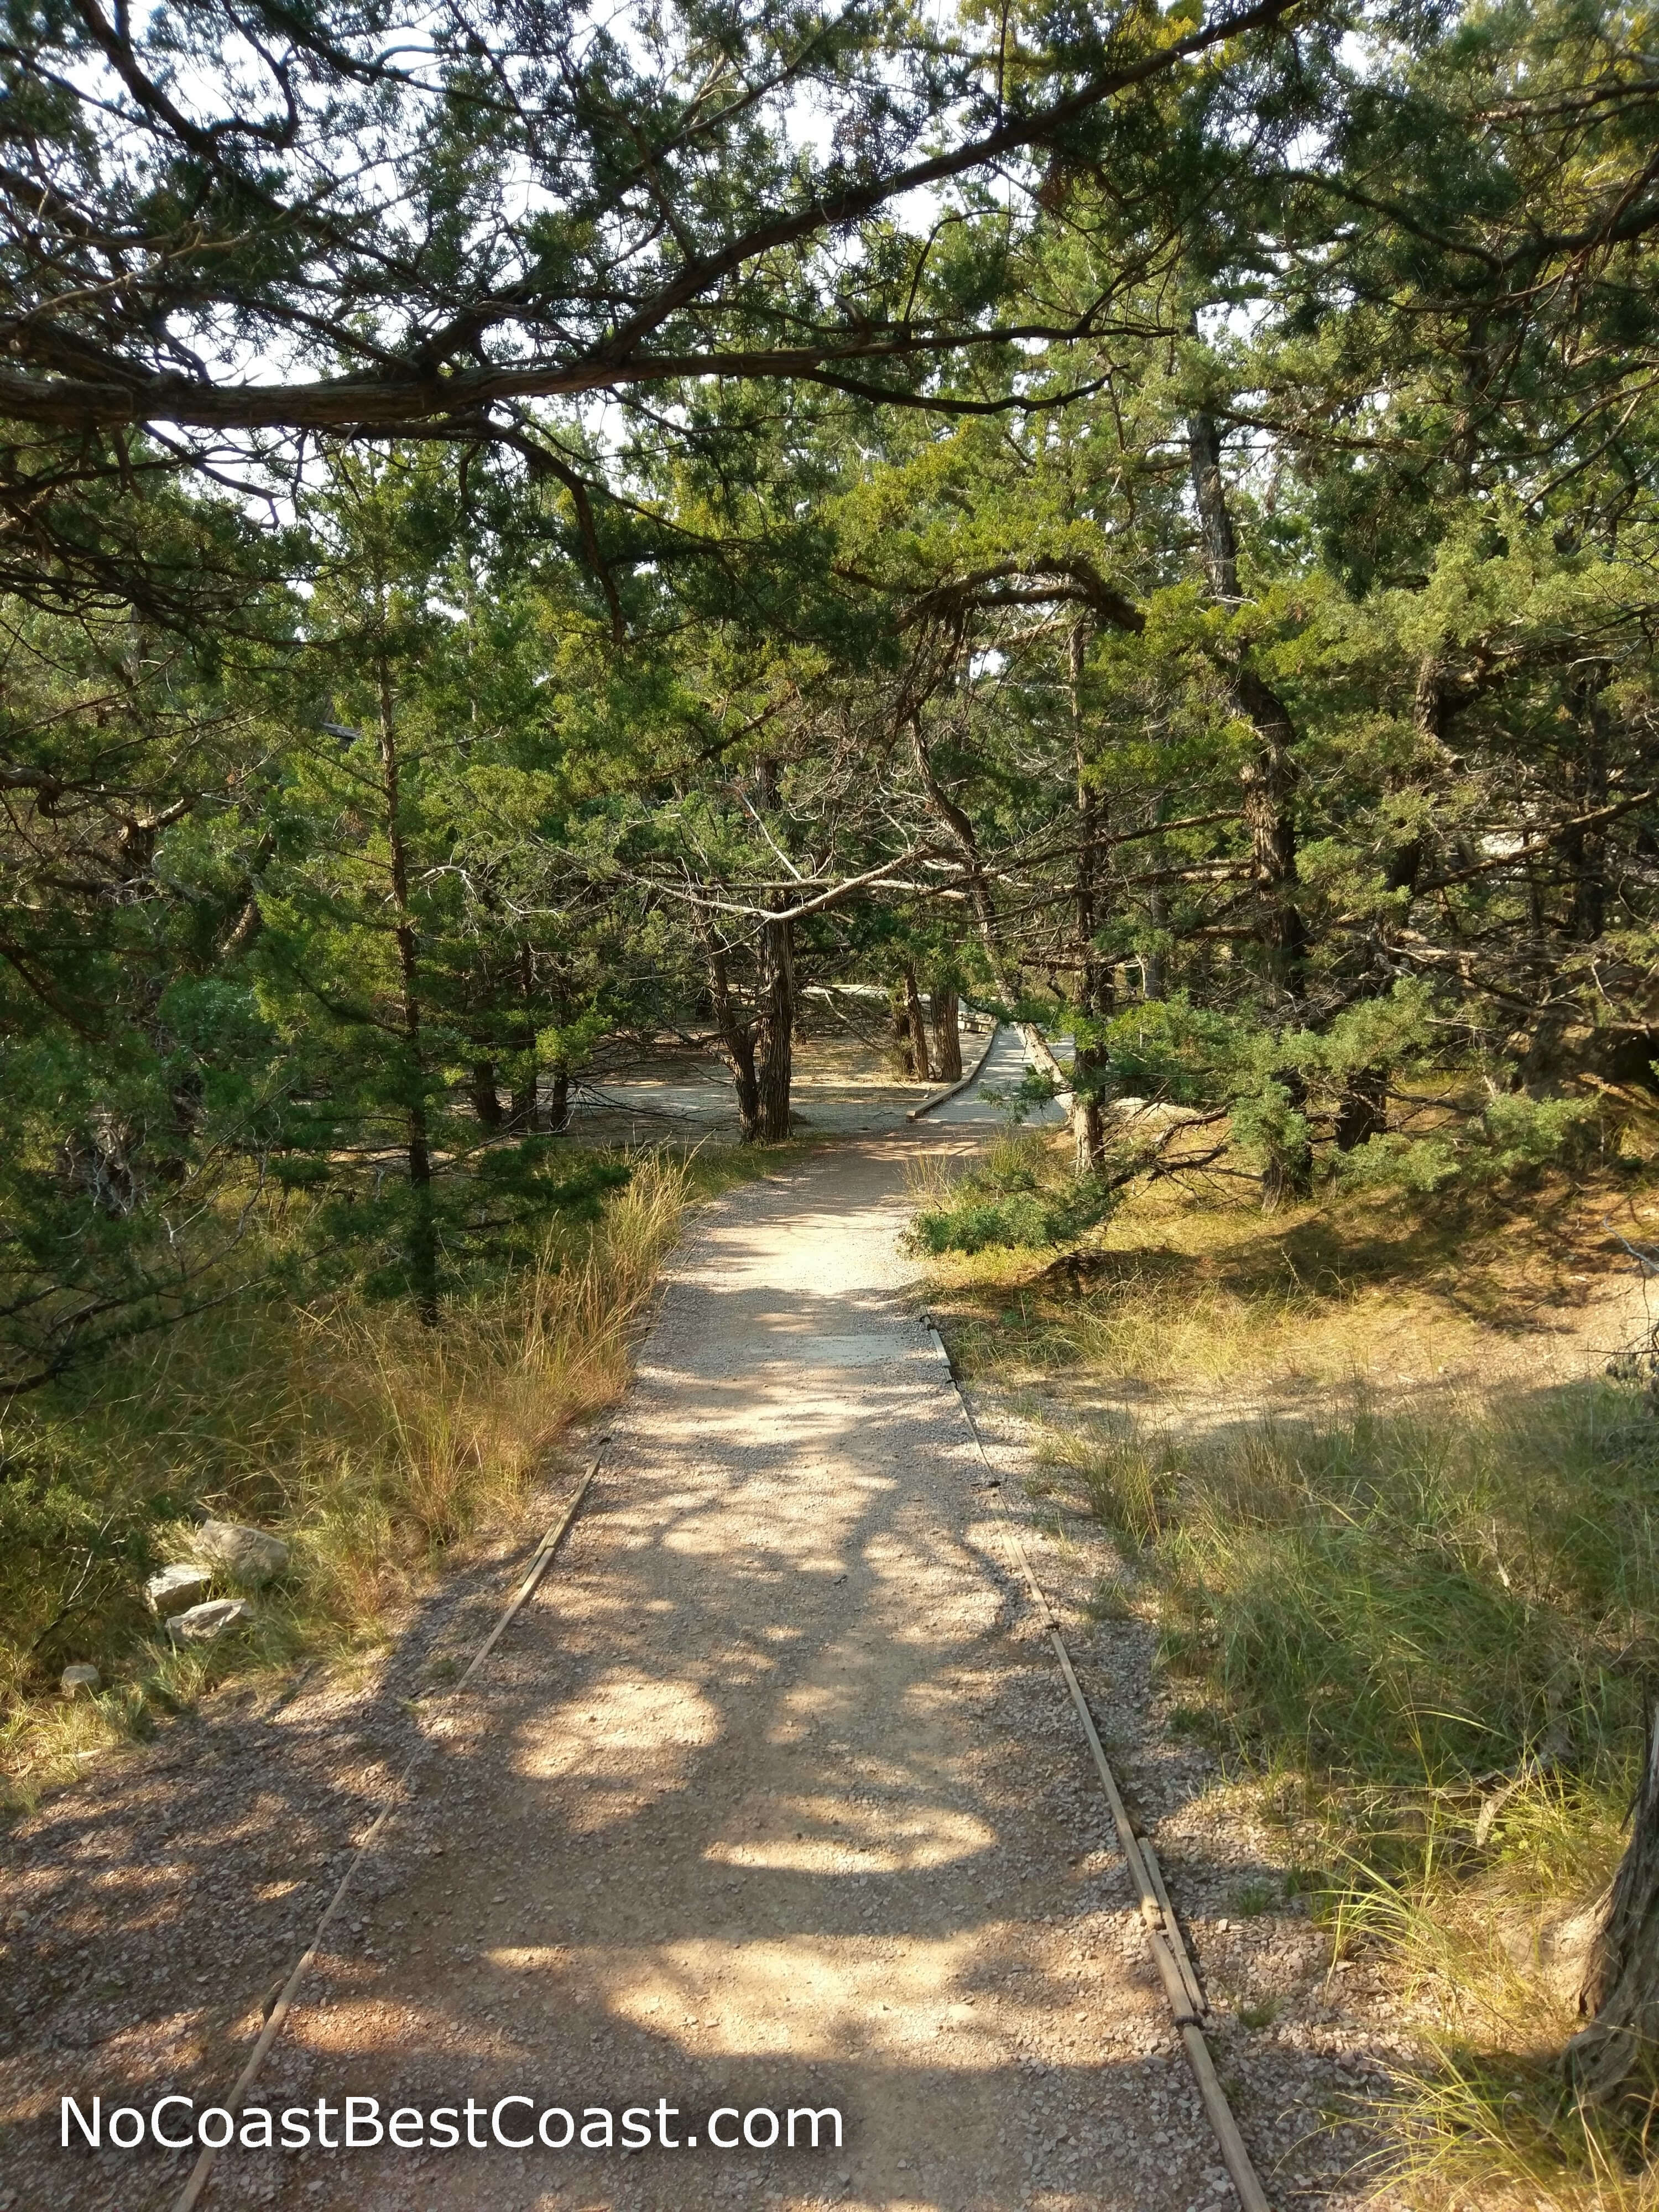 Juniper trees create some of the only shade in the park